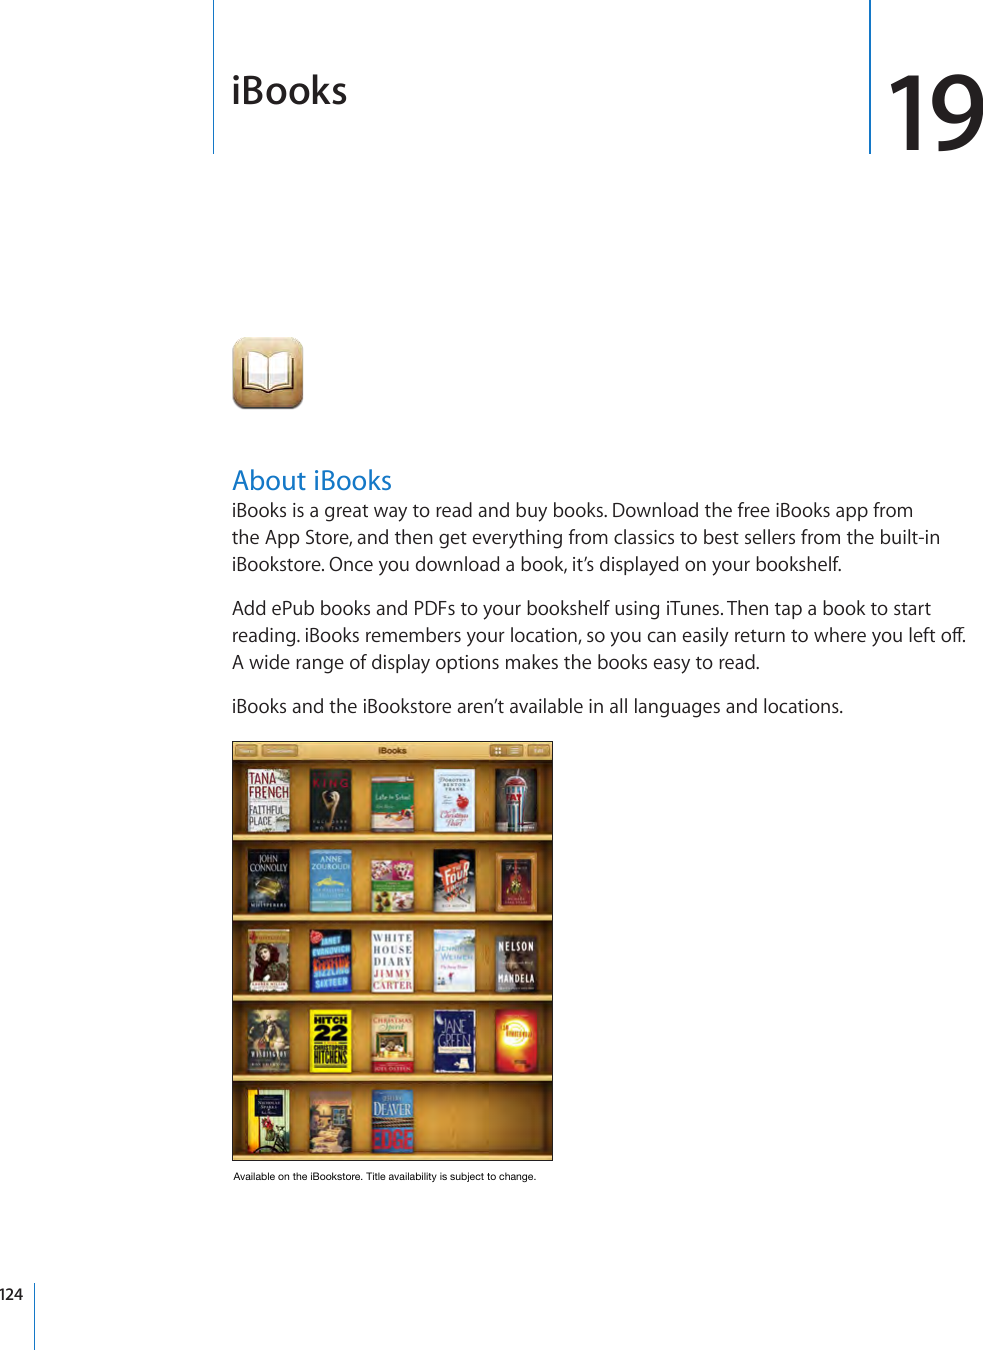 iBooks 19About iBooksiBooks is a great way to read and buy books. Download the free iBooks app from the App Store, and then get everything from classics to best sellers from the built-in iBookstore. Once you download a book, it’s displayed on your bookshelf.Add ePub books and PDFs to your bookshelf using iTunes. Then tap a book to start reading. iBooks remembers your location, so you can easily return to where you left o. A wide range of display options makes the books easy to read.iBooks and the iBookstore aren’t available in all languages and locations.AvailableontheiBookstore.Titleavailabilityissubjecttochange.124